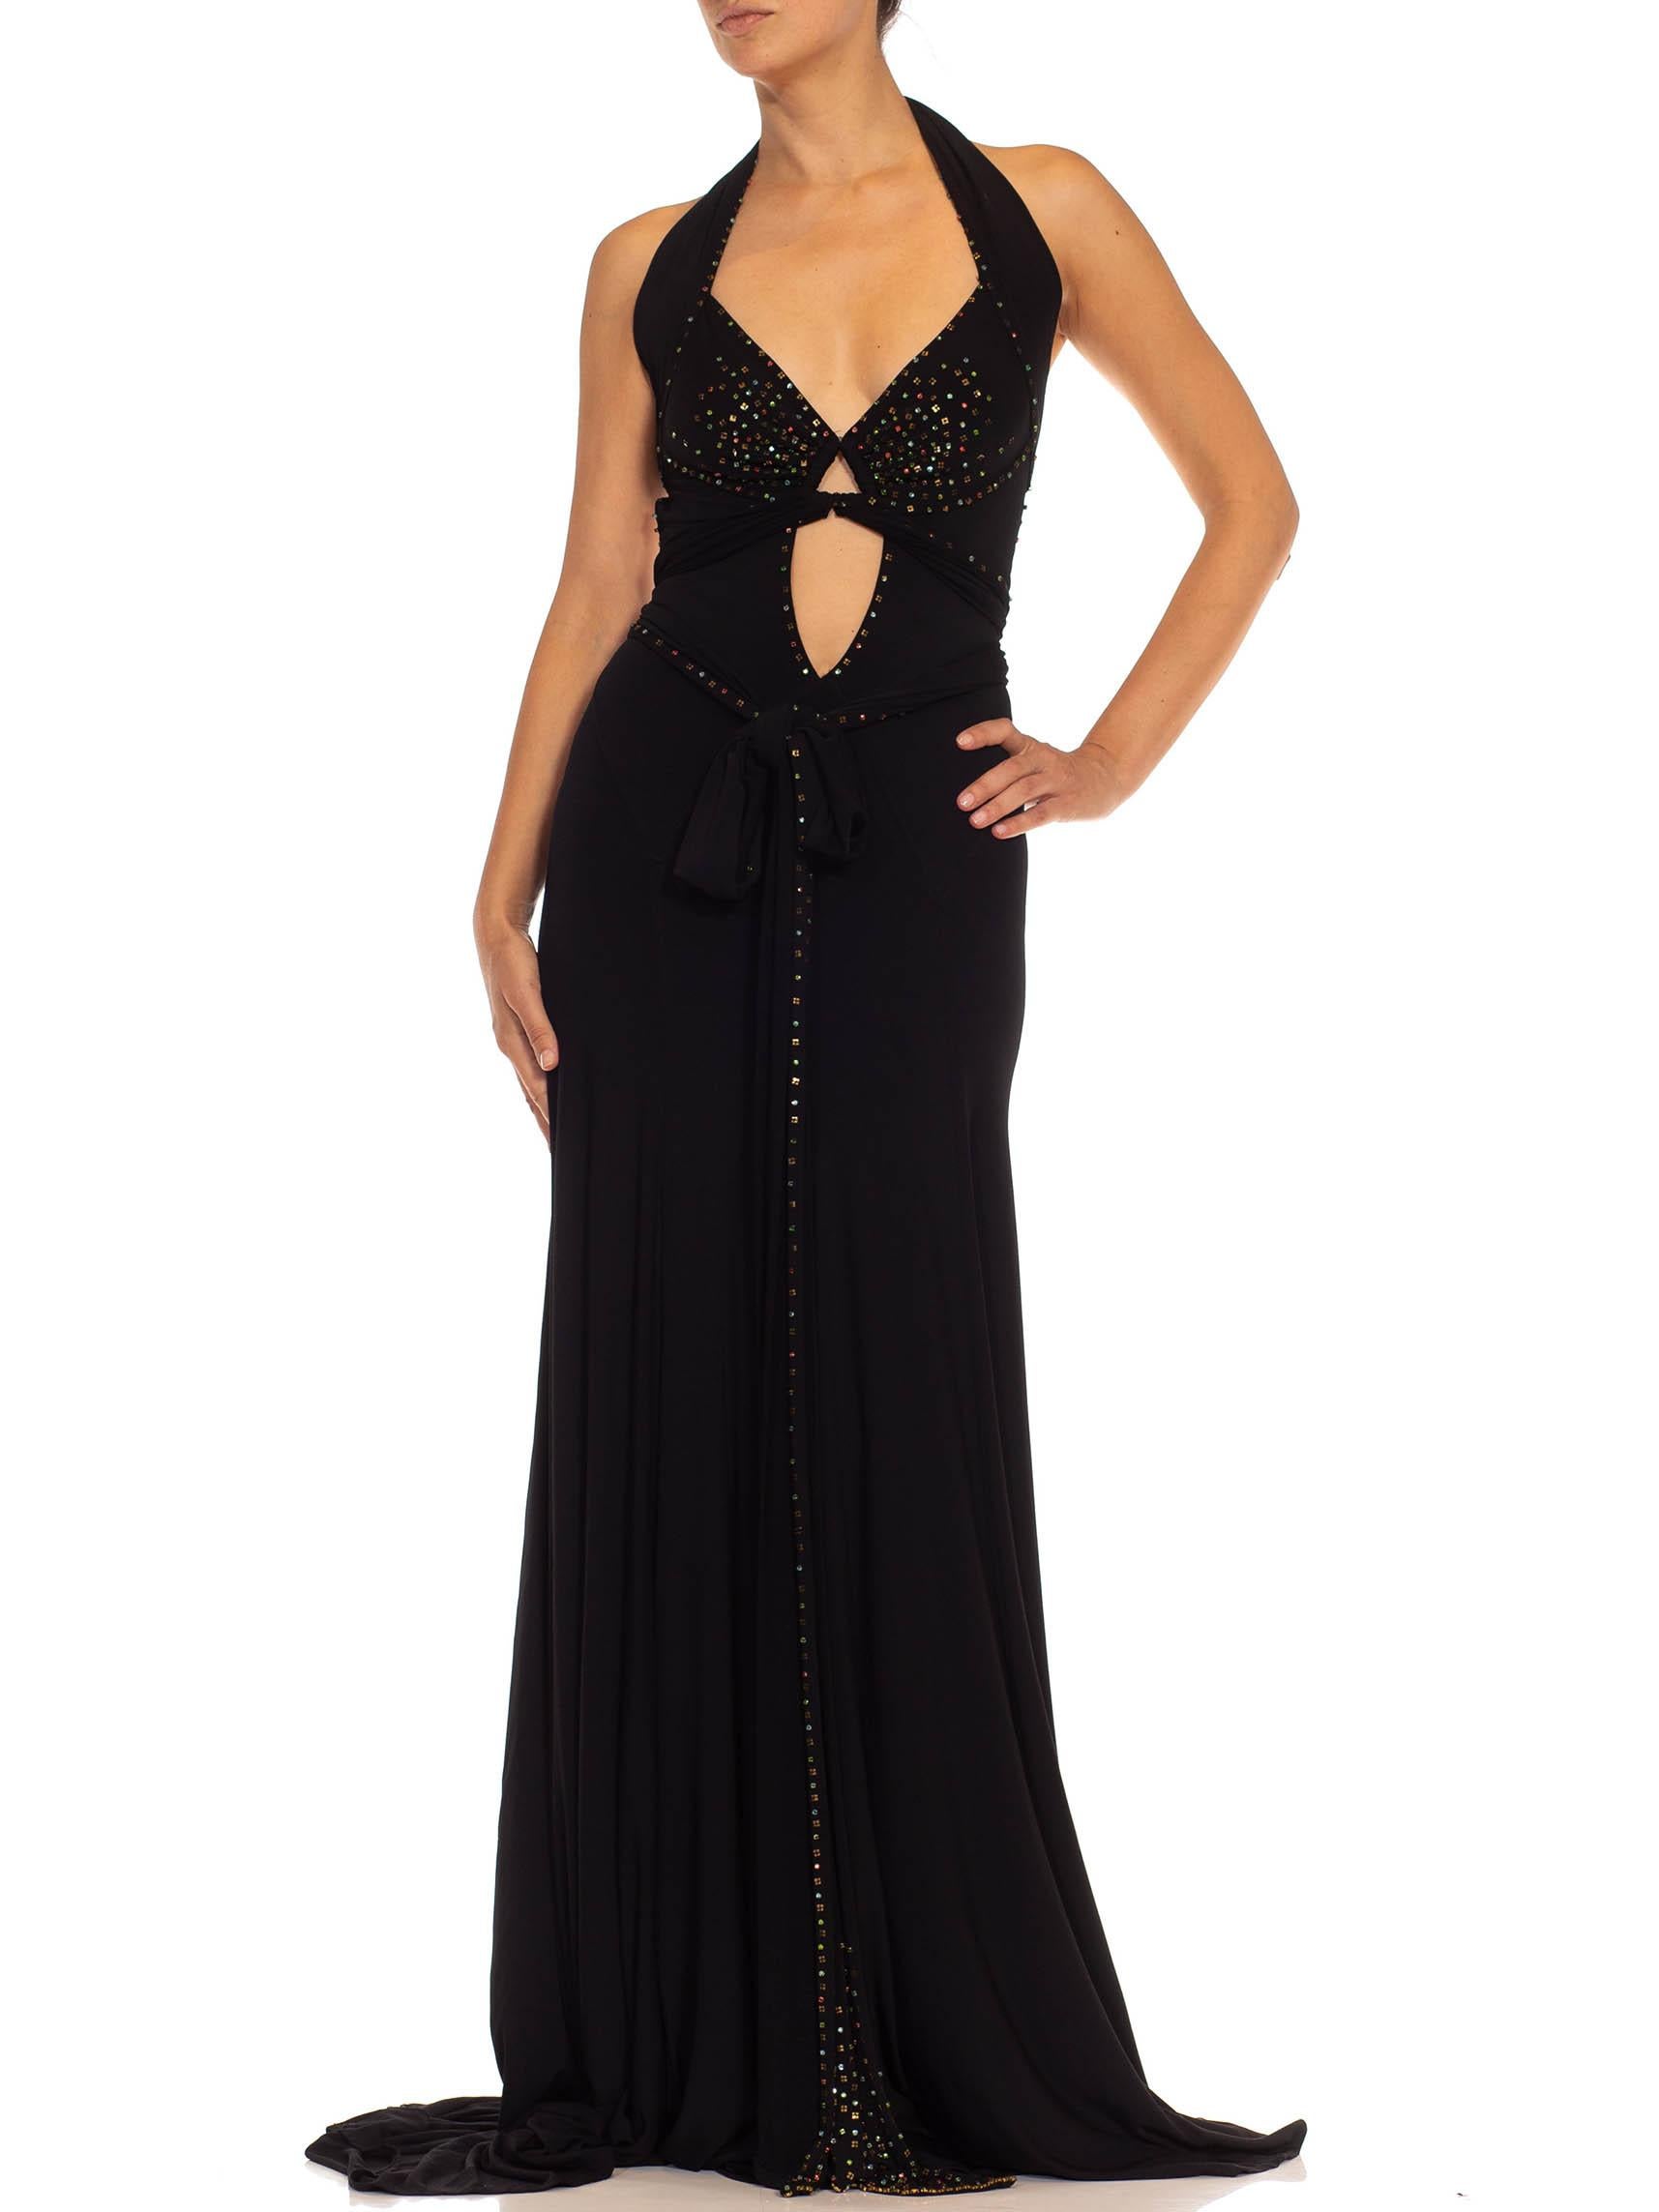 1990S Black Jersey Sexy Slinky Rhinestone Halter Neck Gown With Arm Sleeve Piece For Sale 1